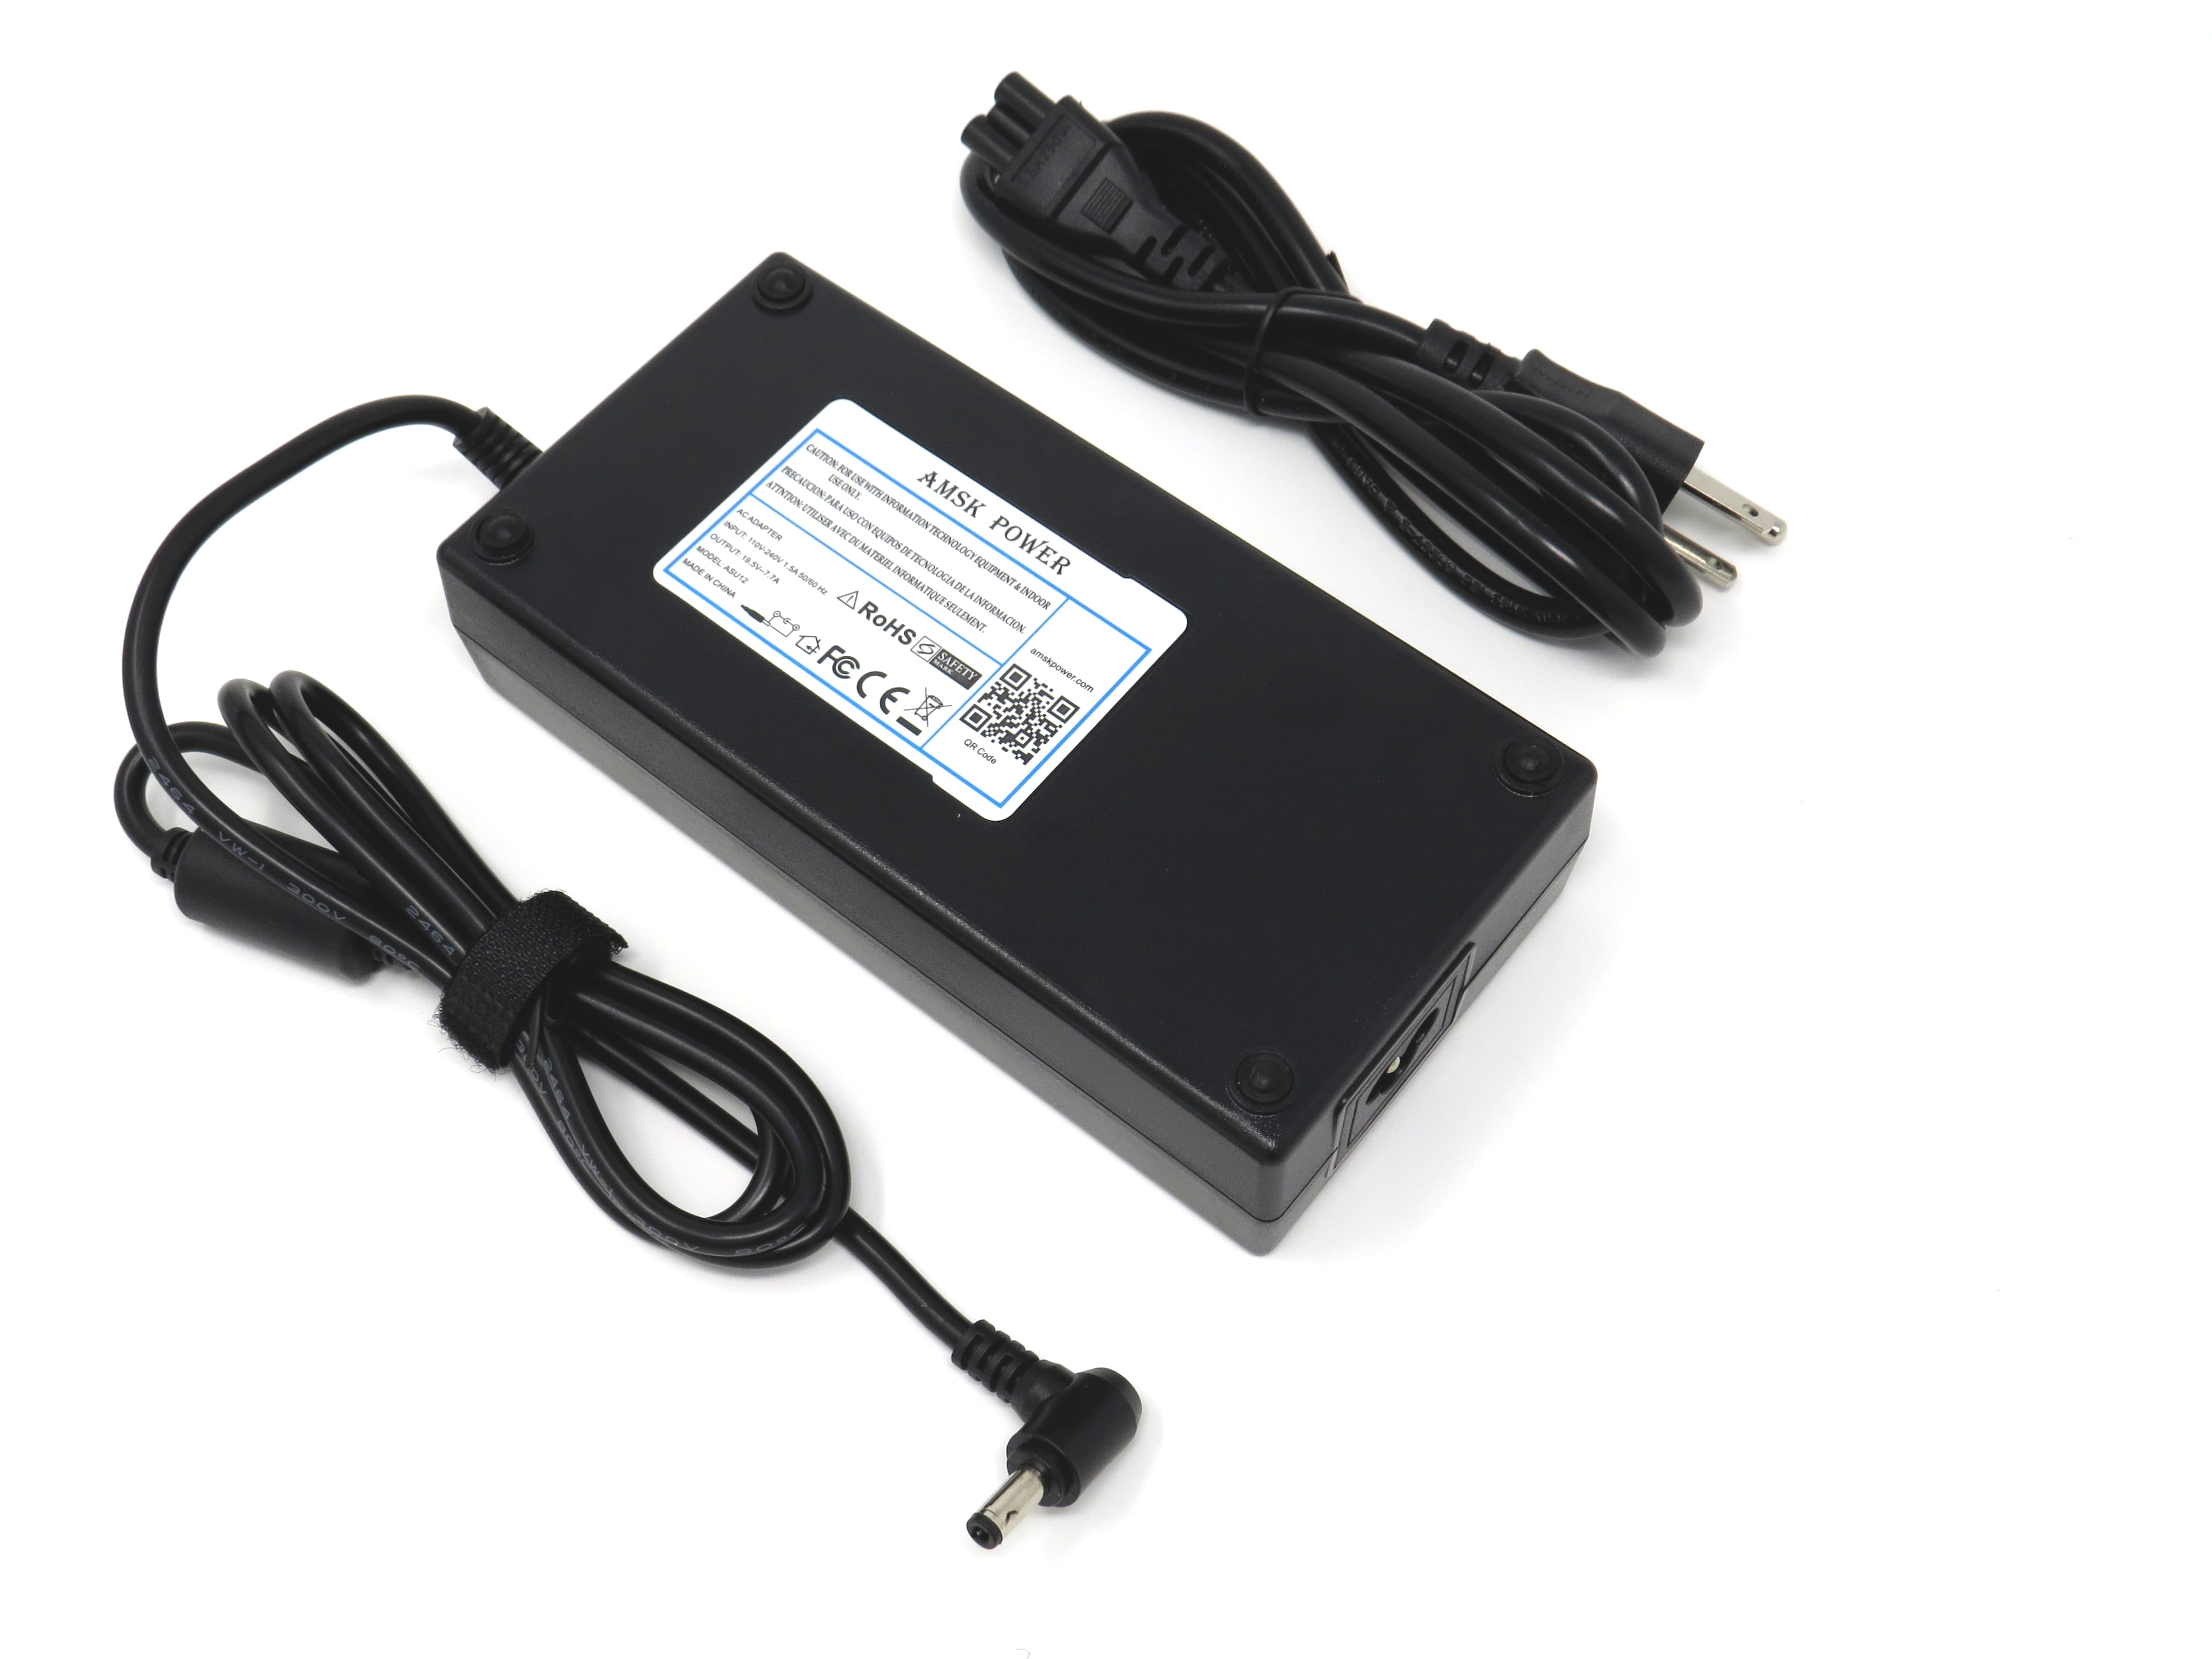 ASUS N550J N550JK Notebook PC Power supply Adapter laptop Battery charger 